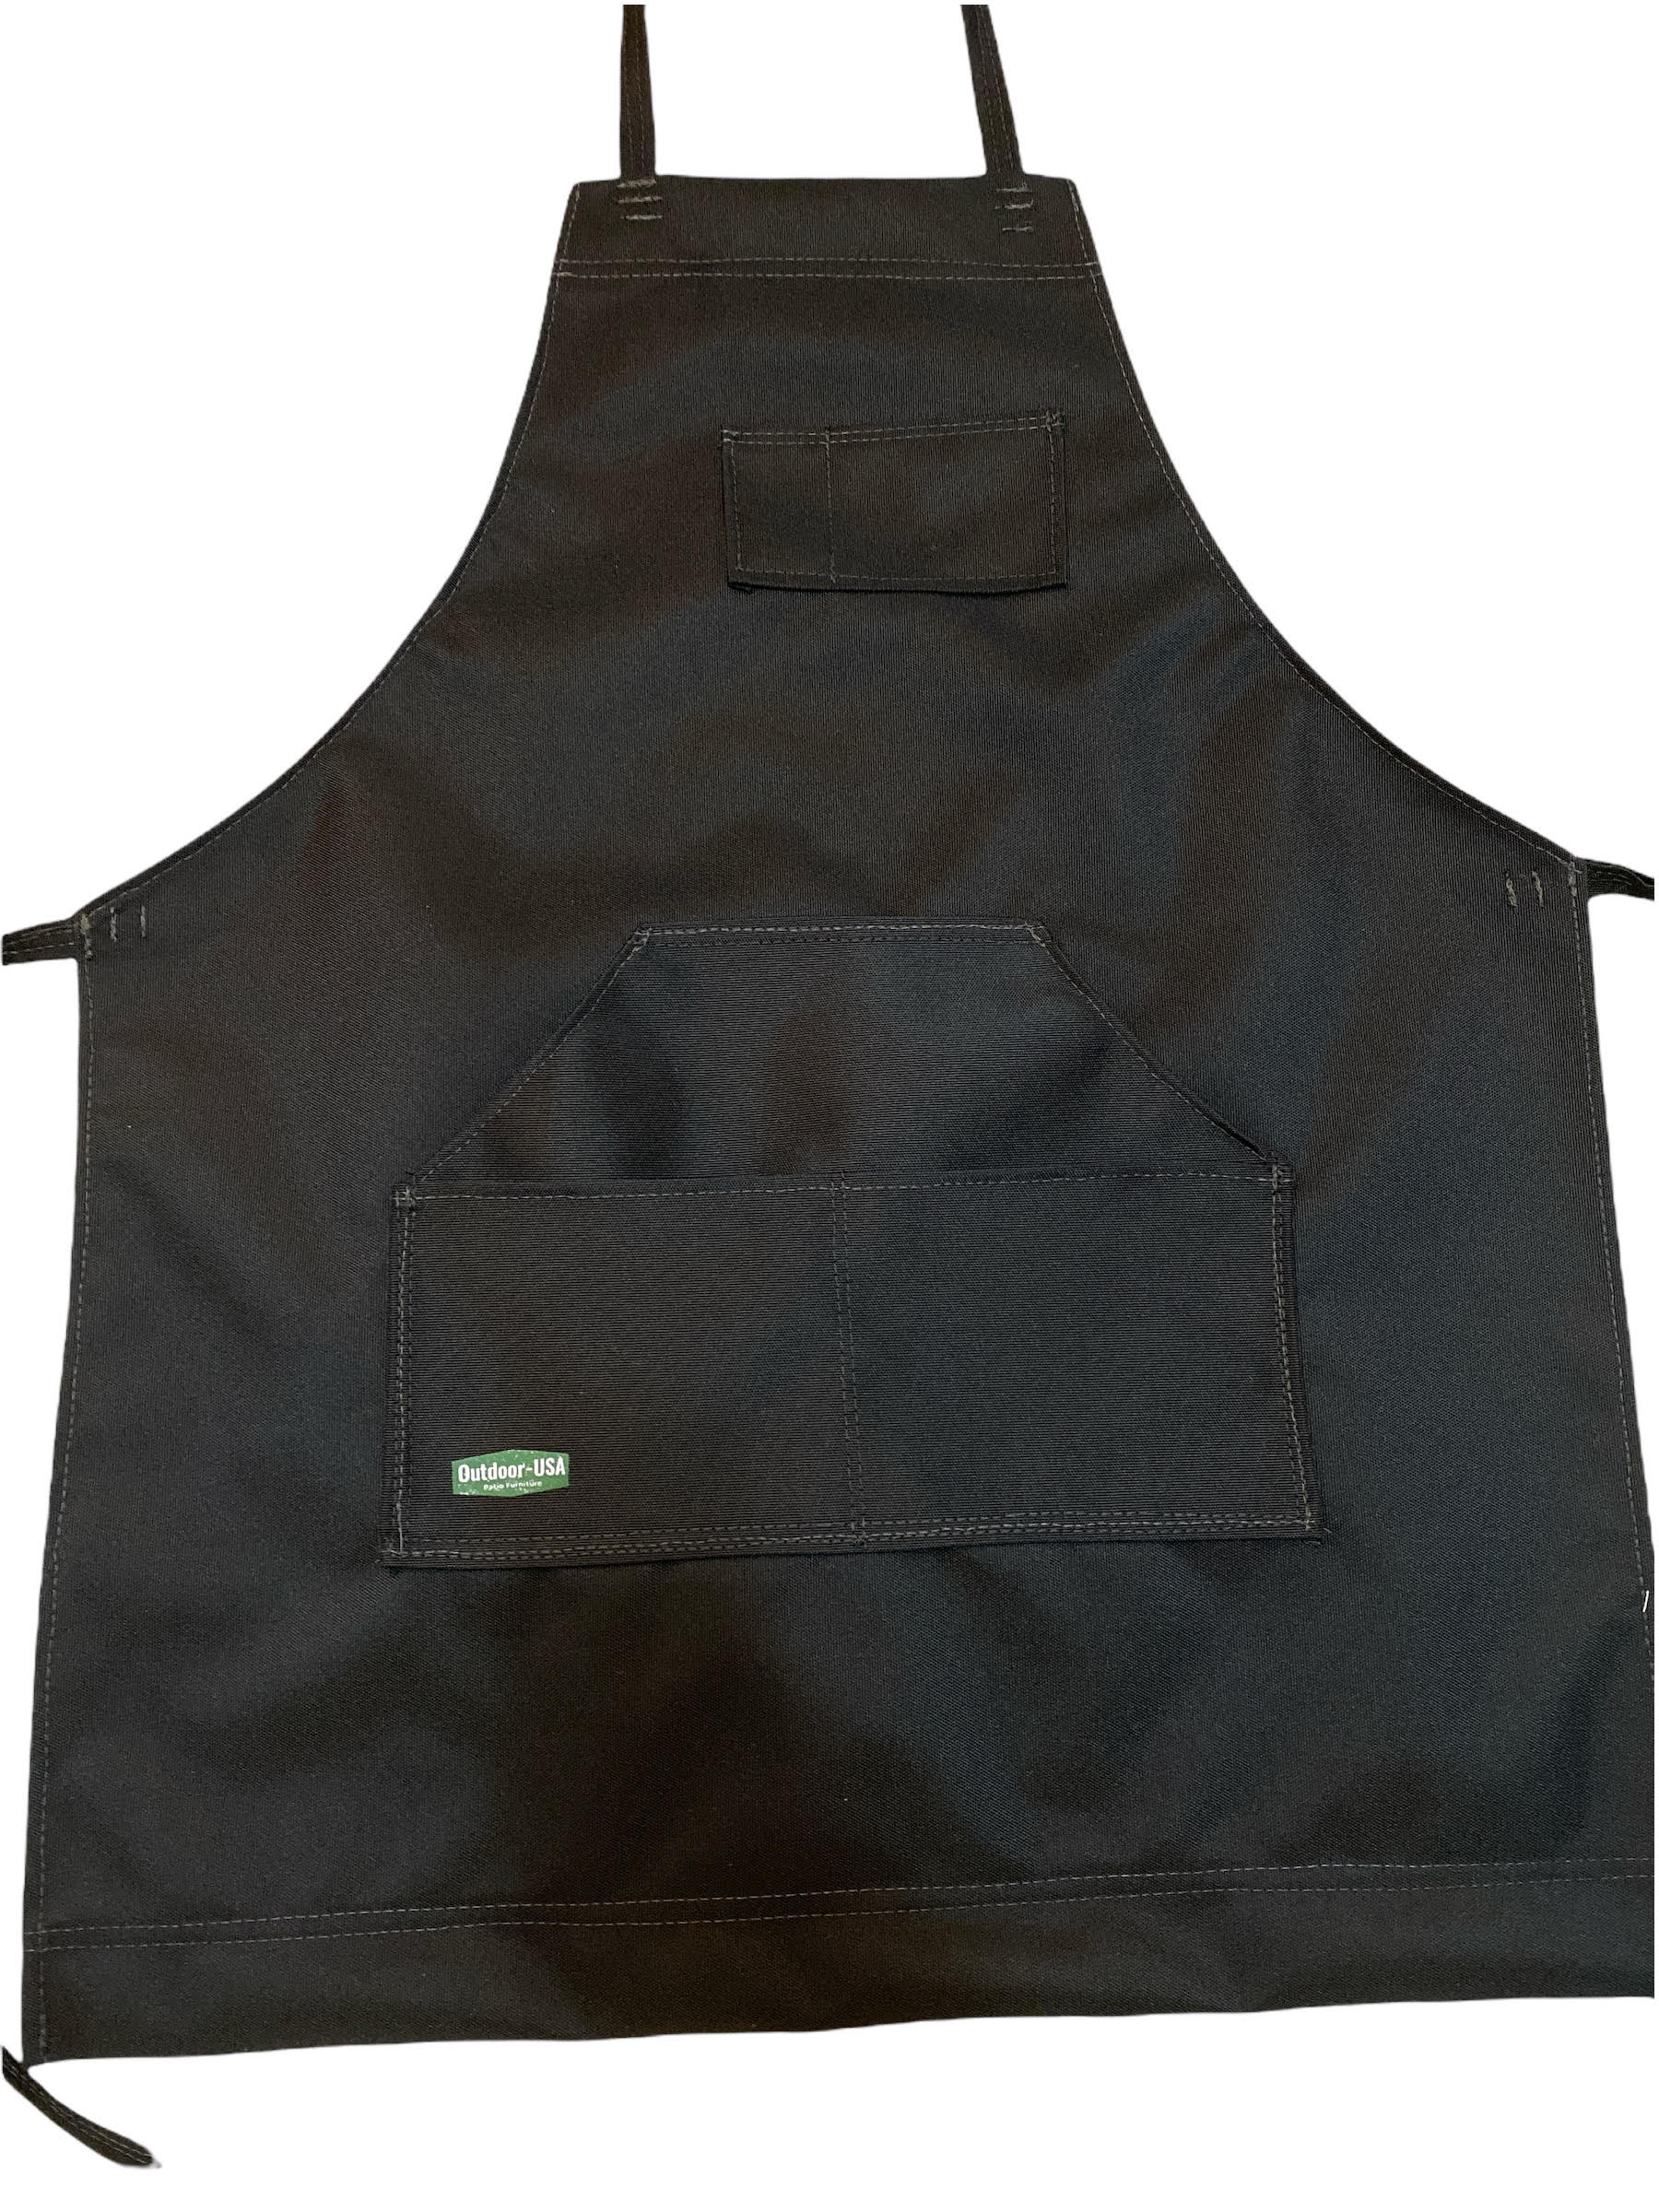 Outdoor-USA  Apron Heavy Duty - Made in USA